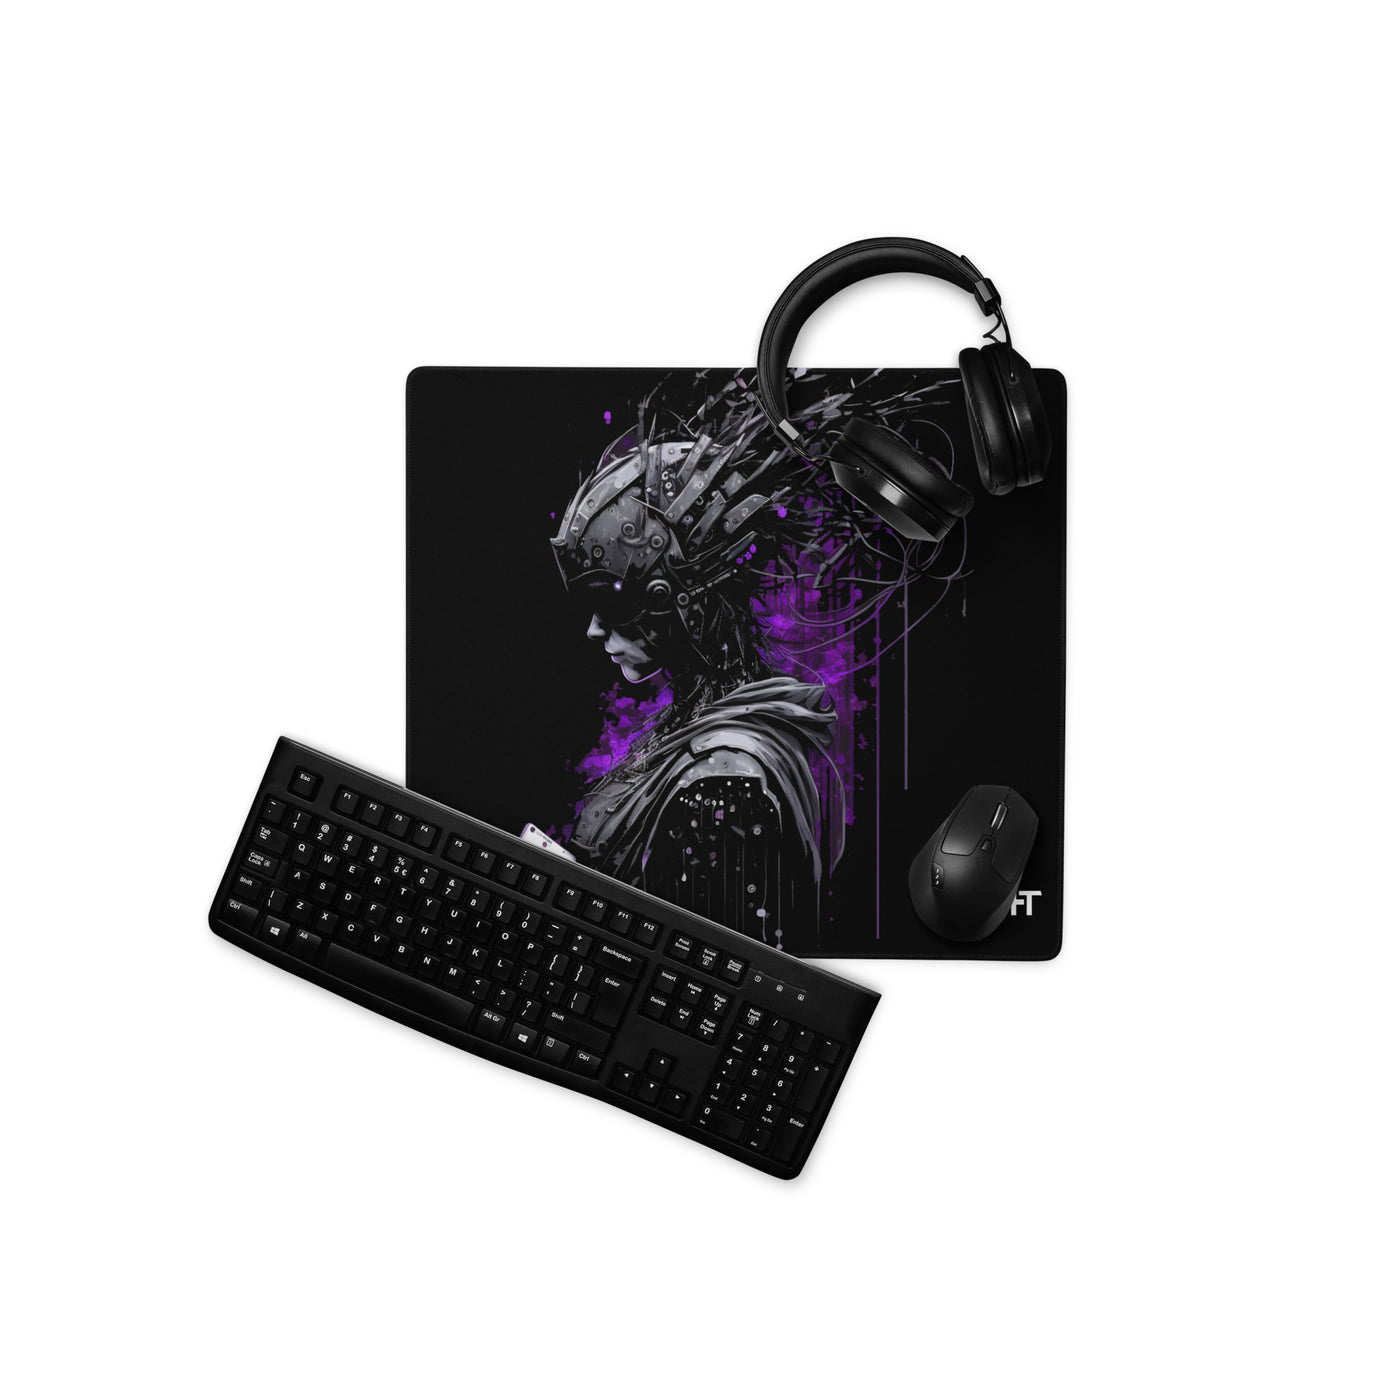 Cyberware assassin v42- Gaming mouse pad